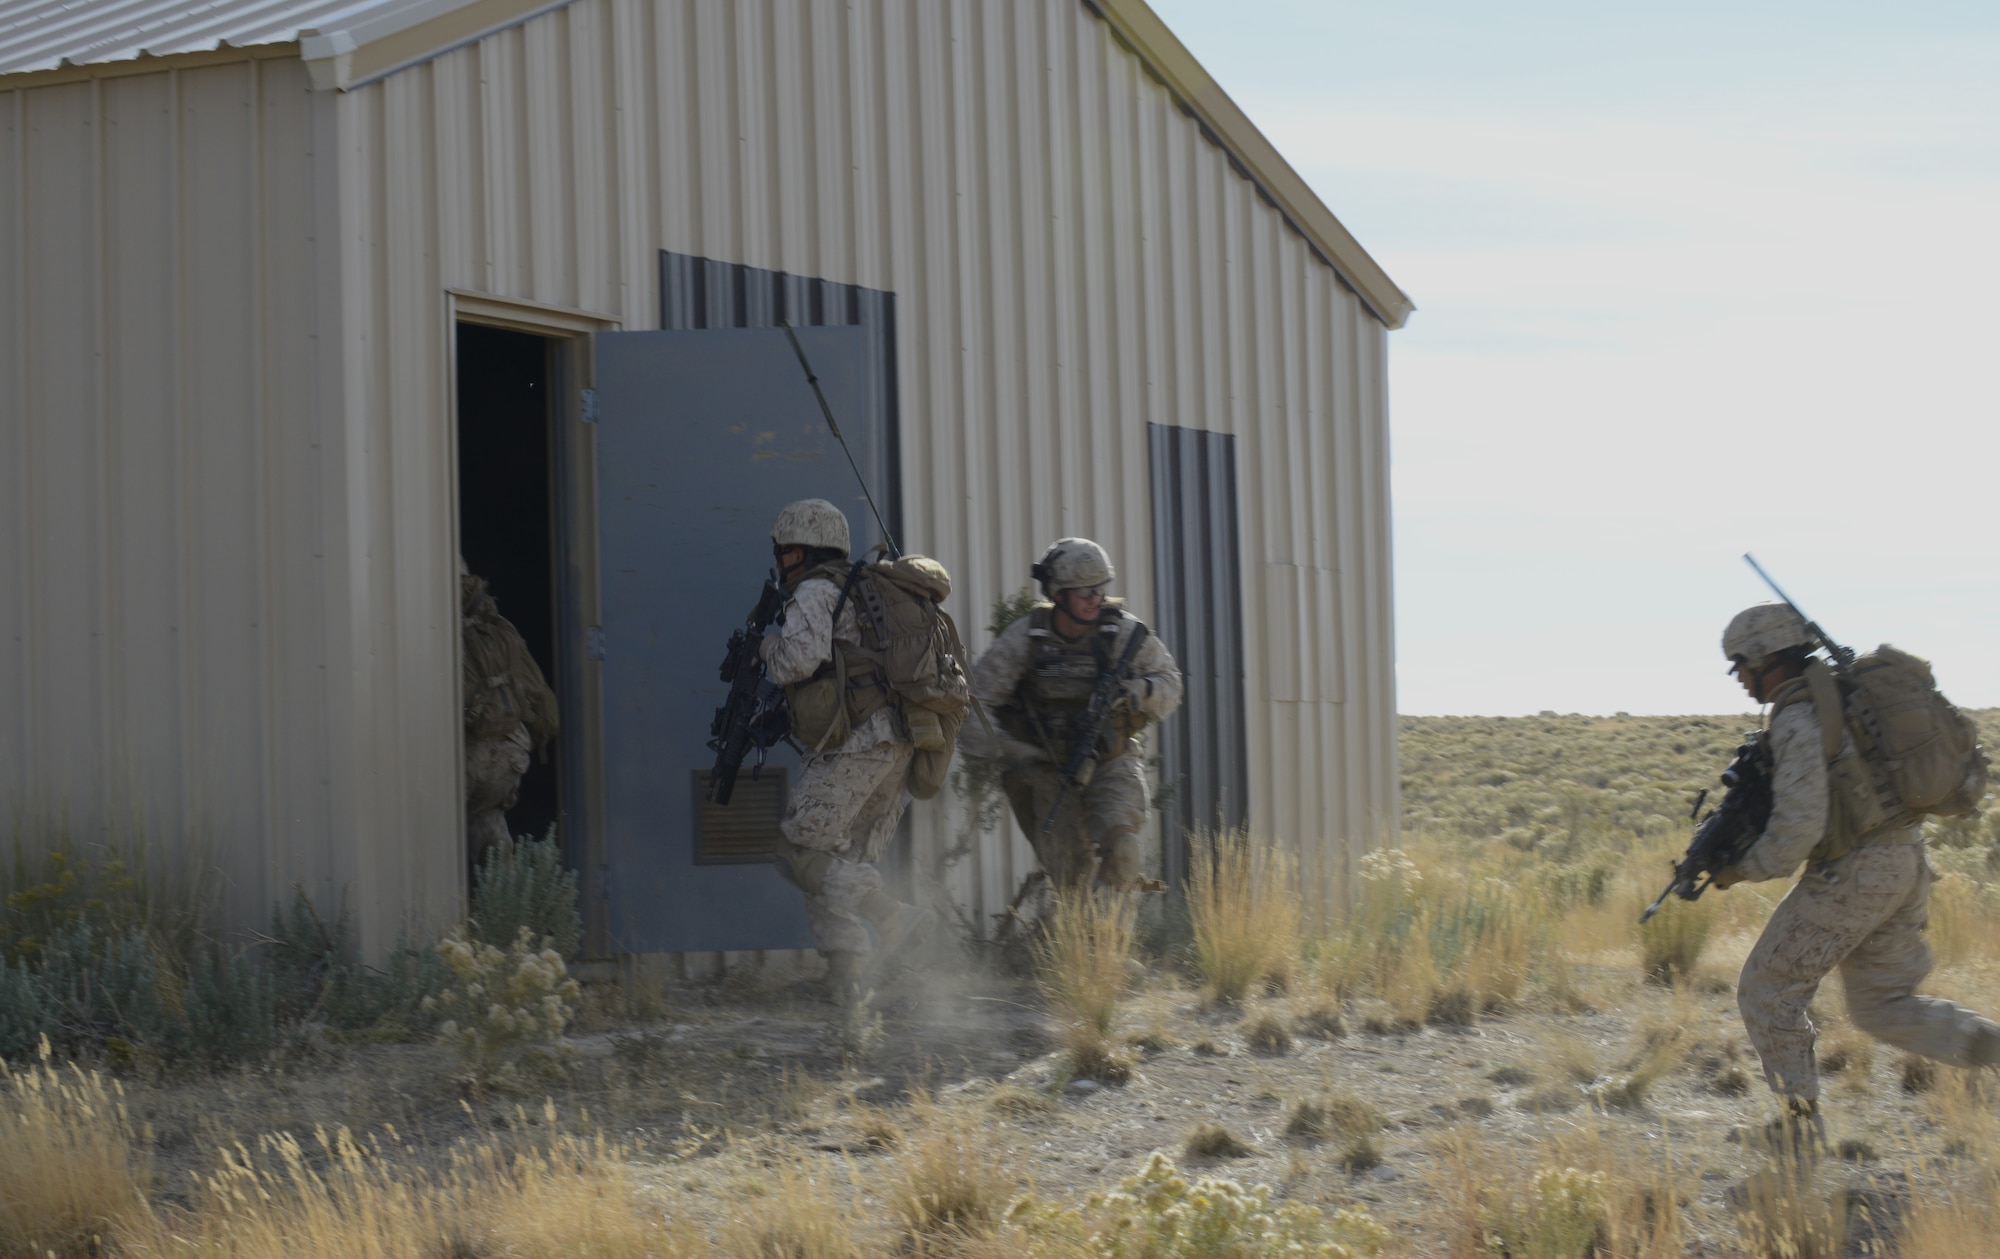 U.S. Marines from the 1st Air Naval Gunfire Liaison Company clear a building during Mountain Roundup 2013 Urban Operations training Oct 8, 2013, at the Juniper Butte range. The 1st ANGLICO team members also called in close air support during the exercise to re-qualify JTACs and to maintain proficiency in their ability to provide CAS, while training with another major coalition partner nation – Germany. (U.S. Air Force photo by Senior Airman Benjamin Sutton/RELEASED)